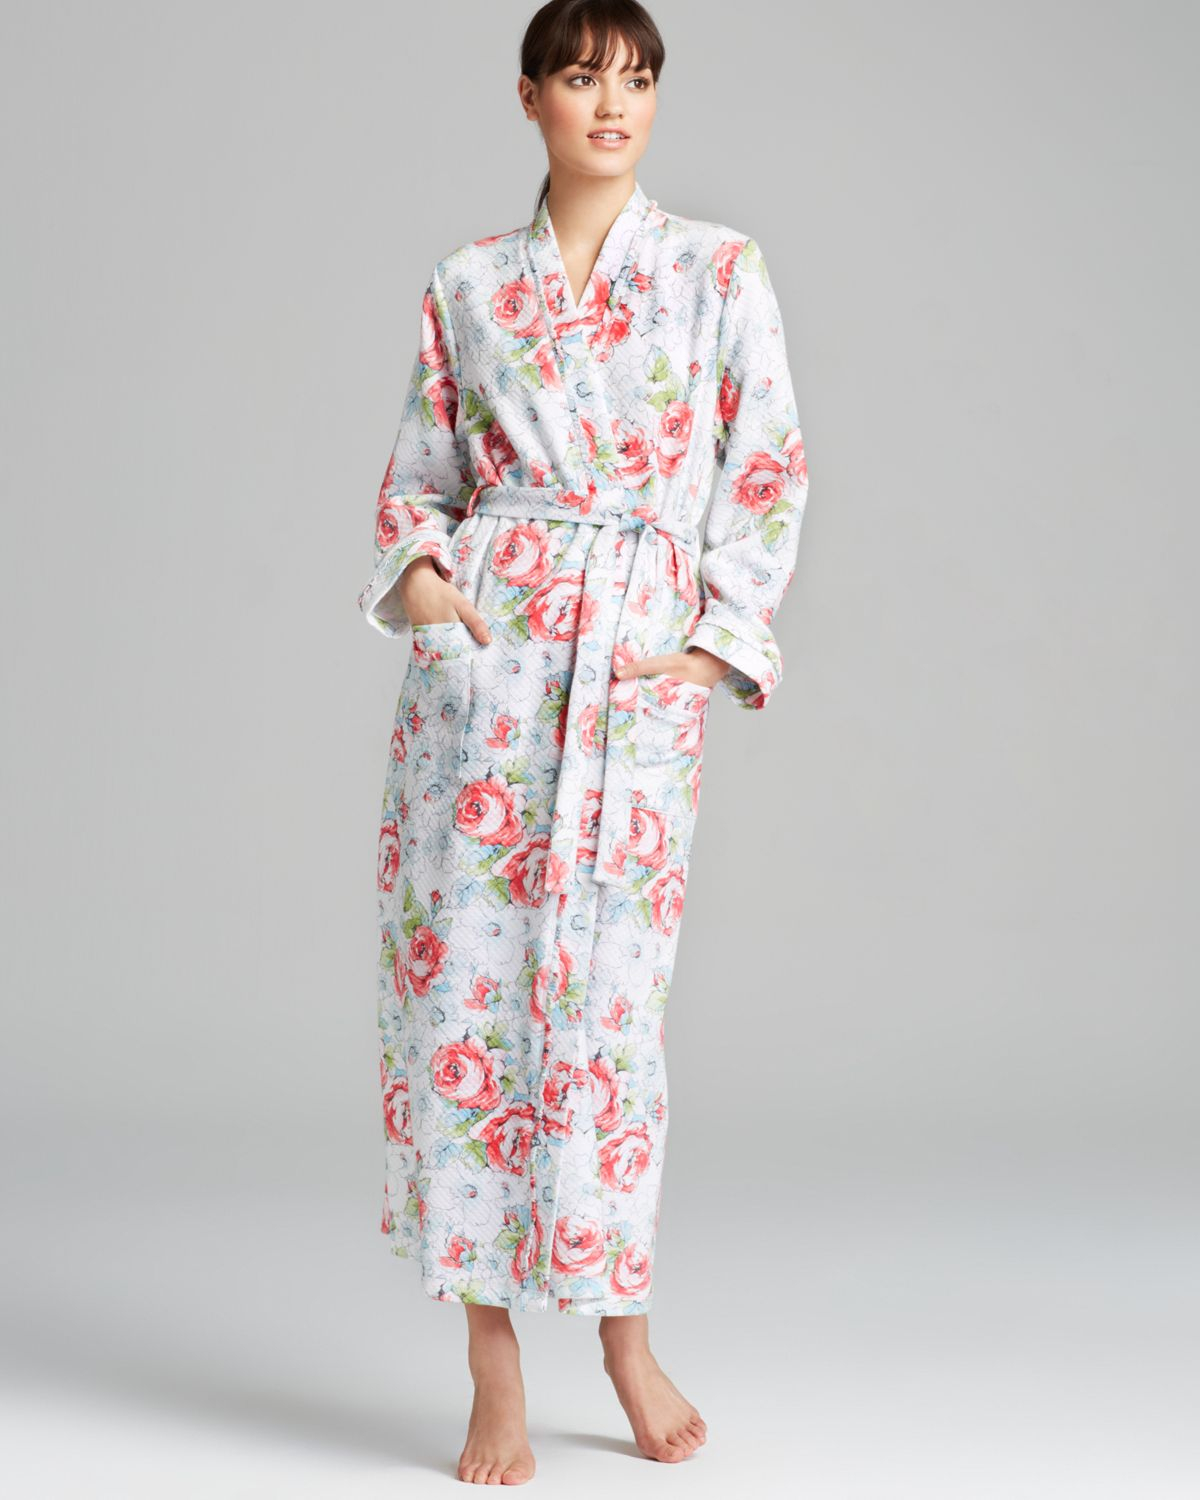 Lyst - Carole Hochman Floral Quilted Long Robe in Blue